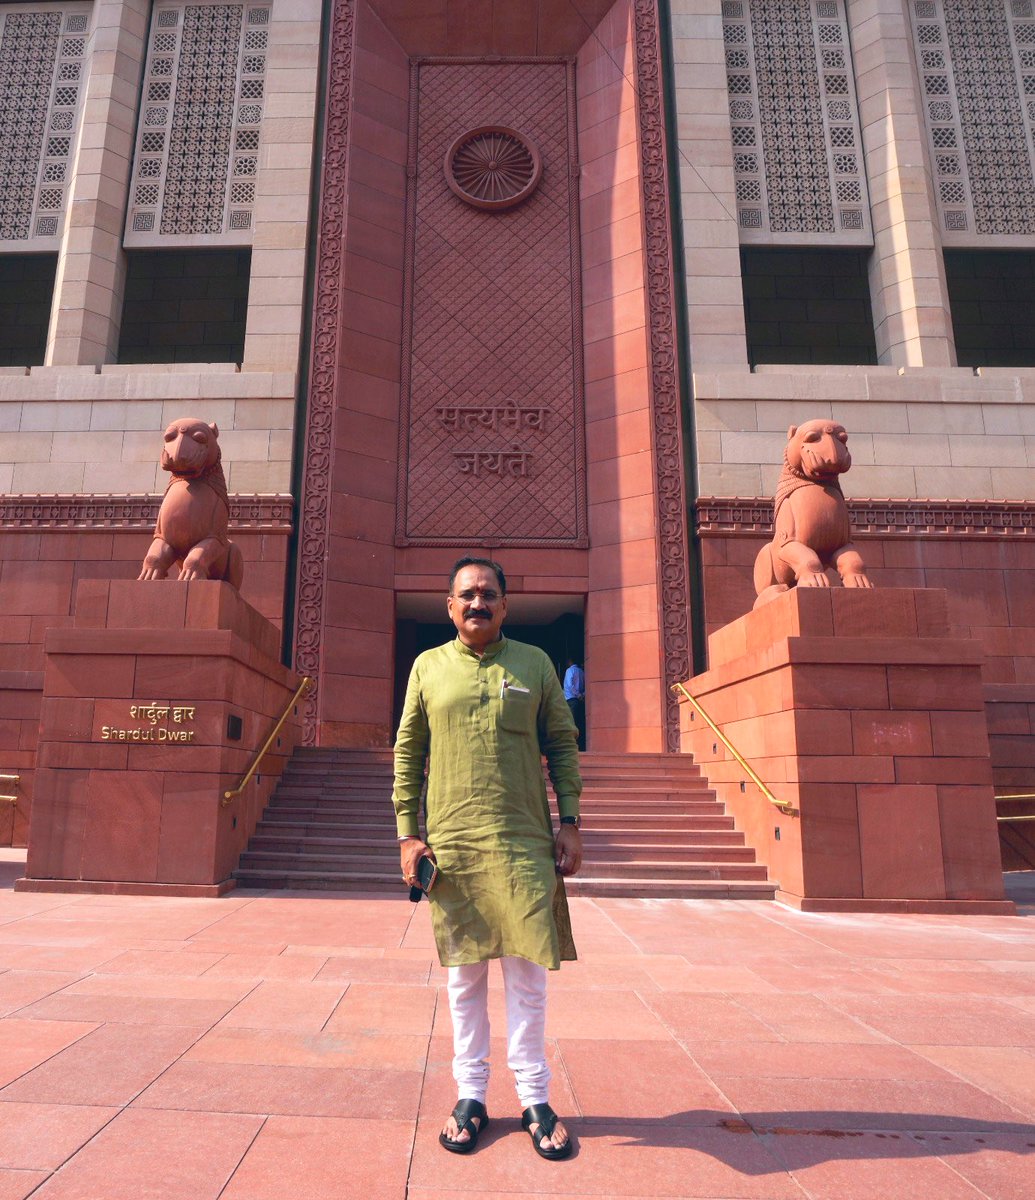 At the Temple of Democracy- New Parliament of India. 

#NewParliamentHouse 

@blsanthosh